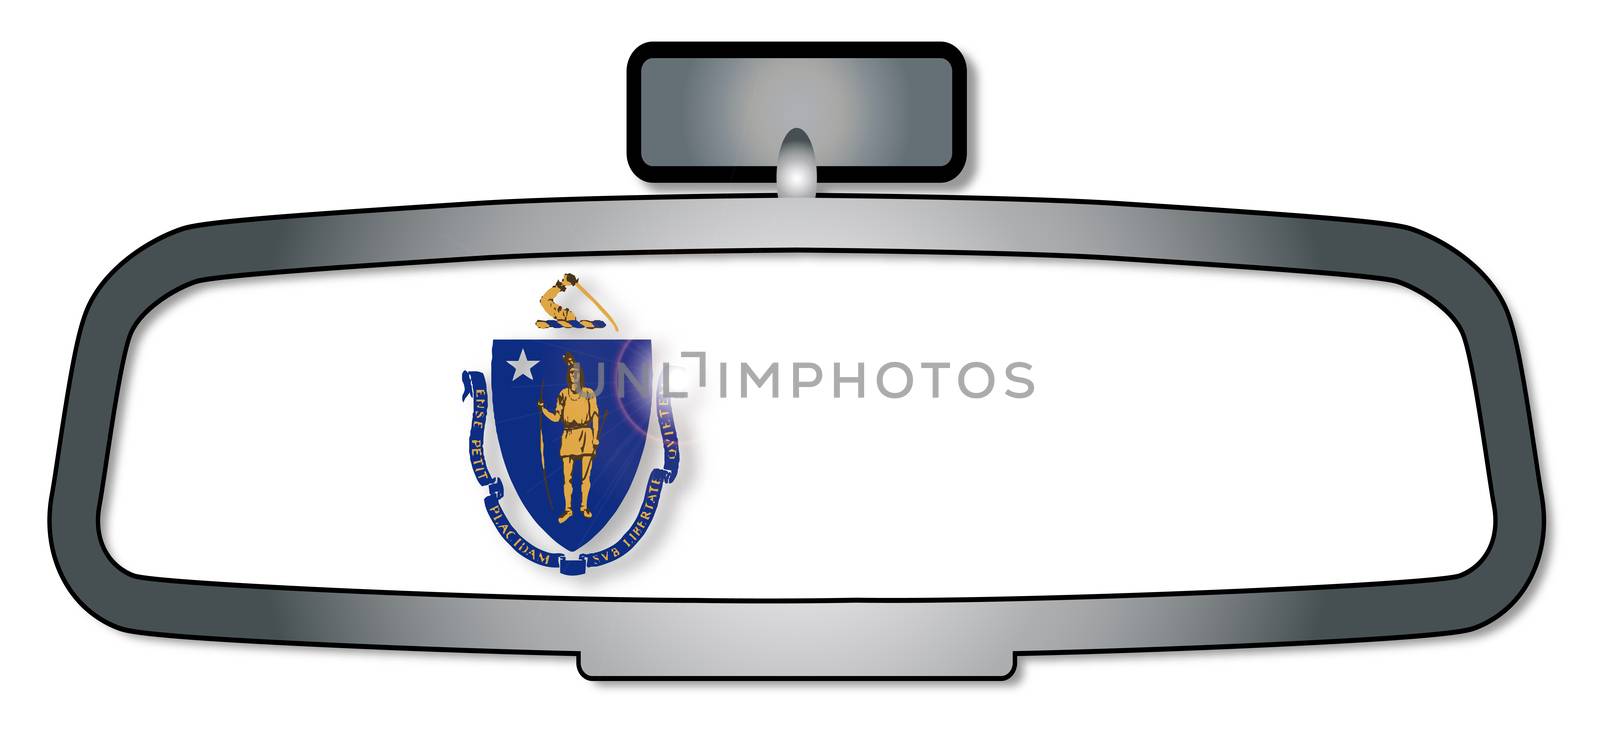 A vehicle rear view mirror with the flag of the state of Massachusetts